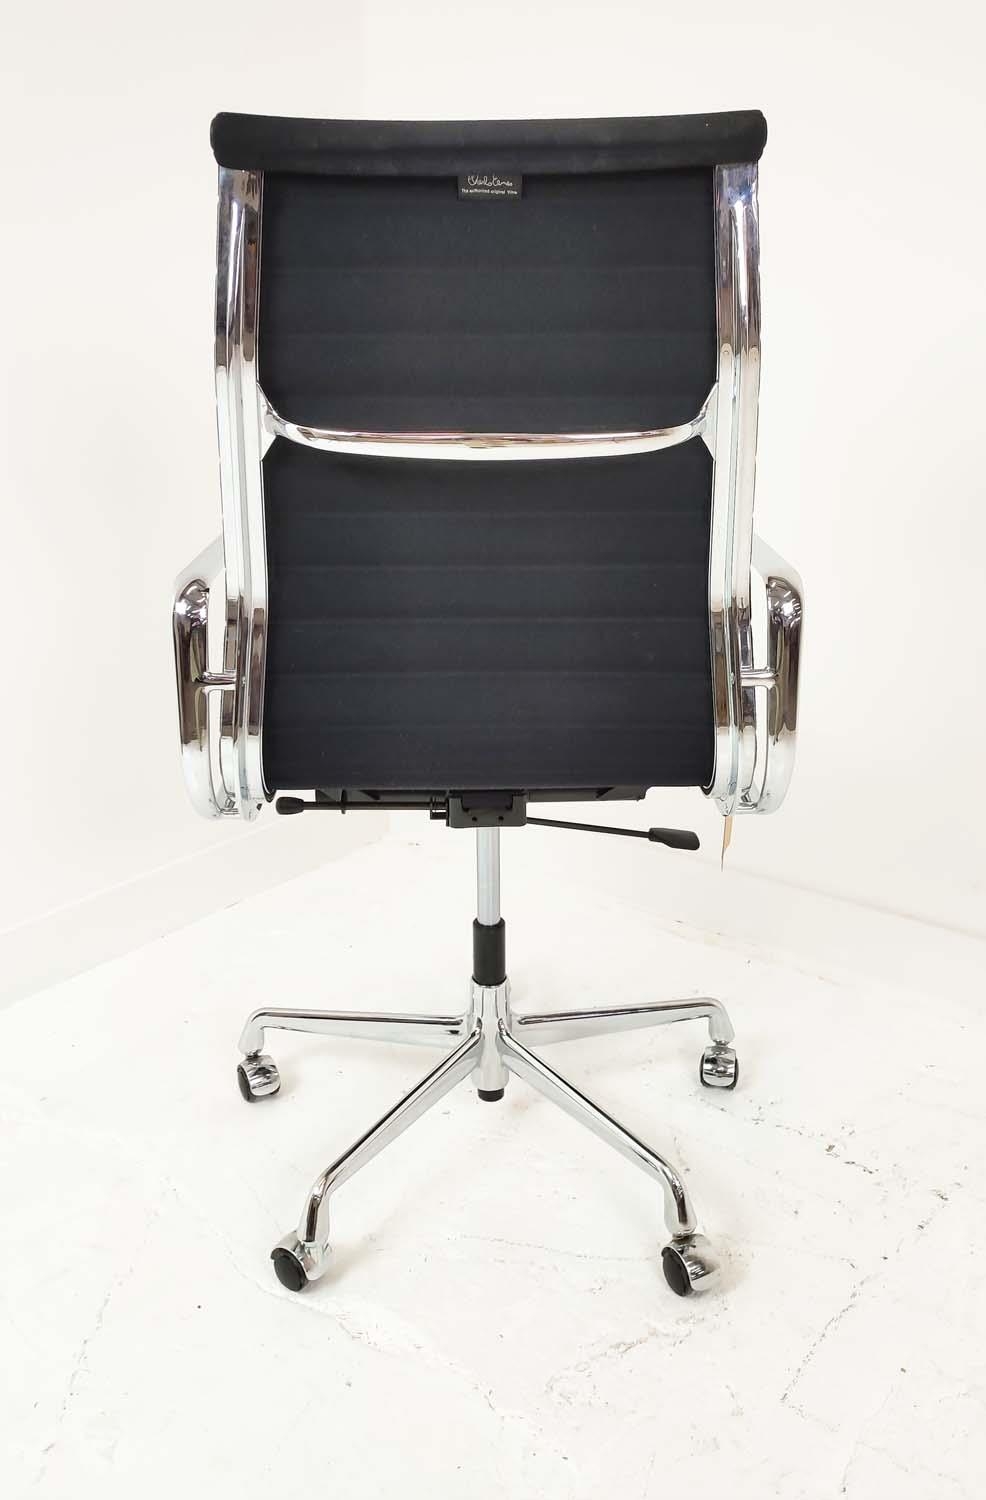 VITRA ALUMINIUM GROUP CHAIR, by Charles and Ray Eames, 113.5cm H at largest. - Image 8 of 9